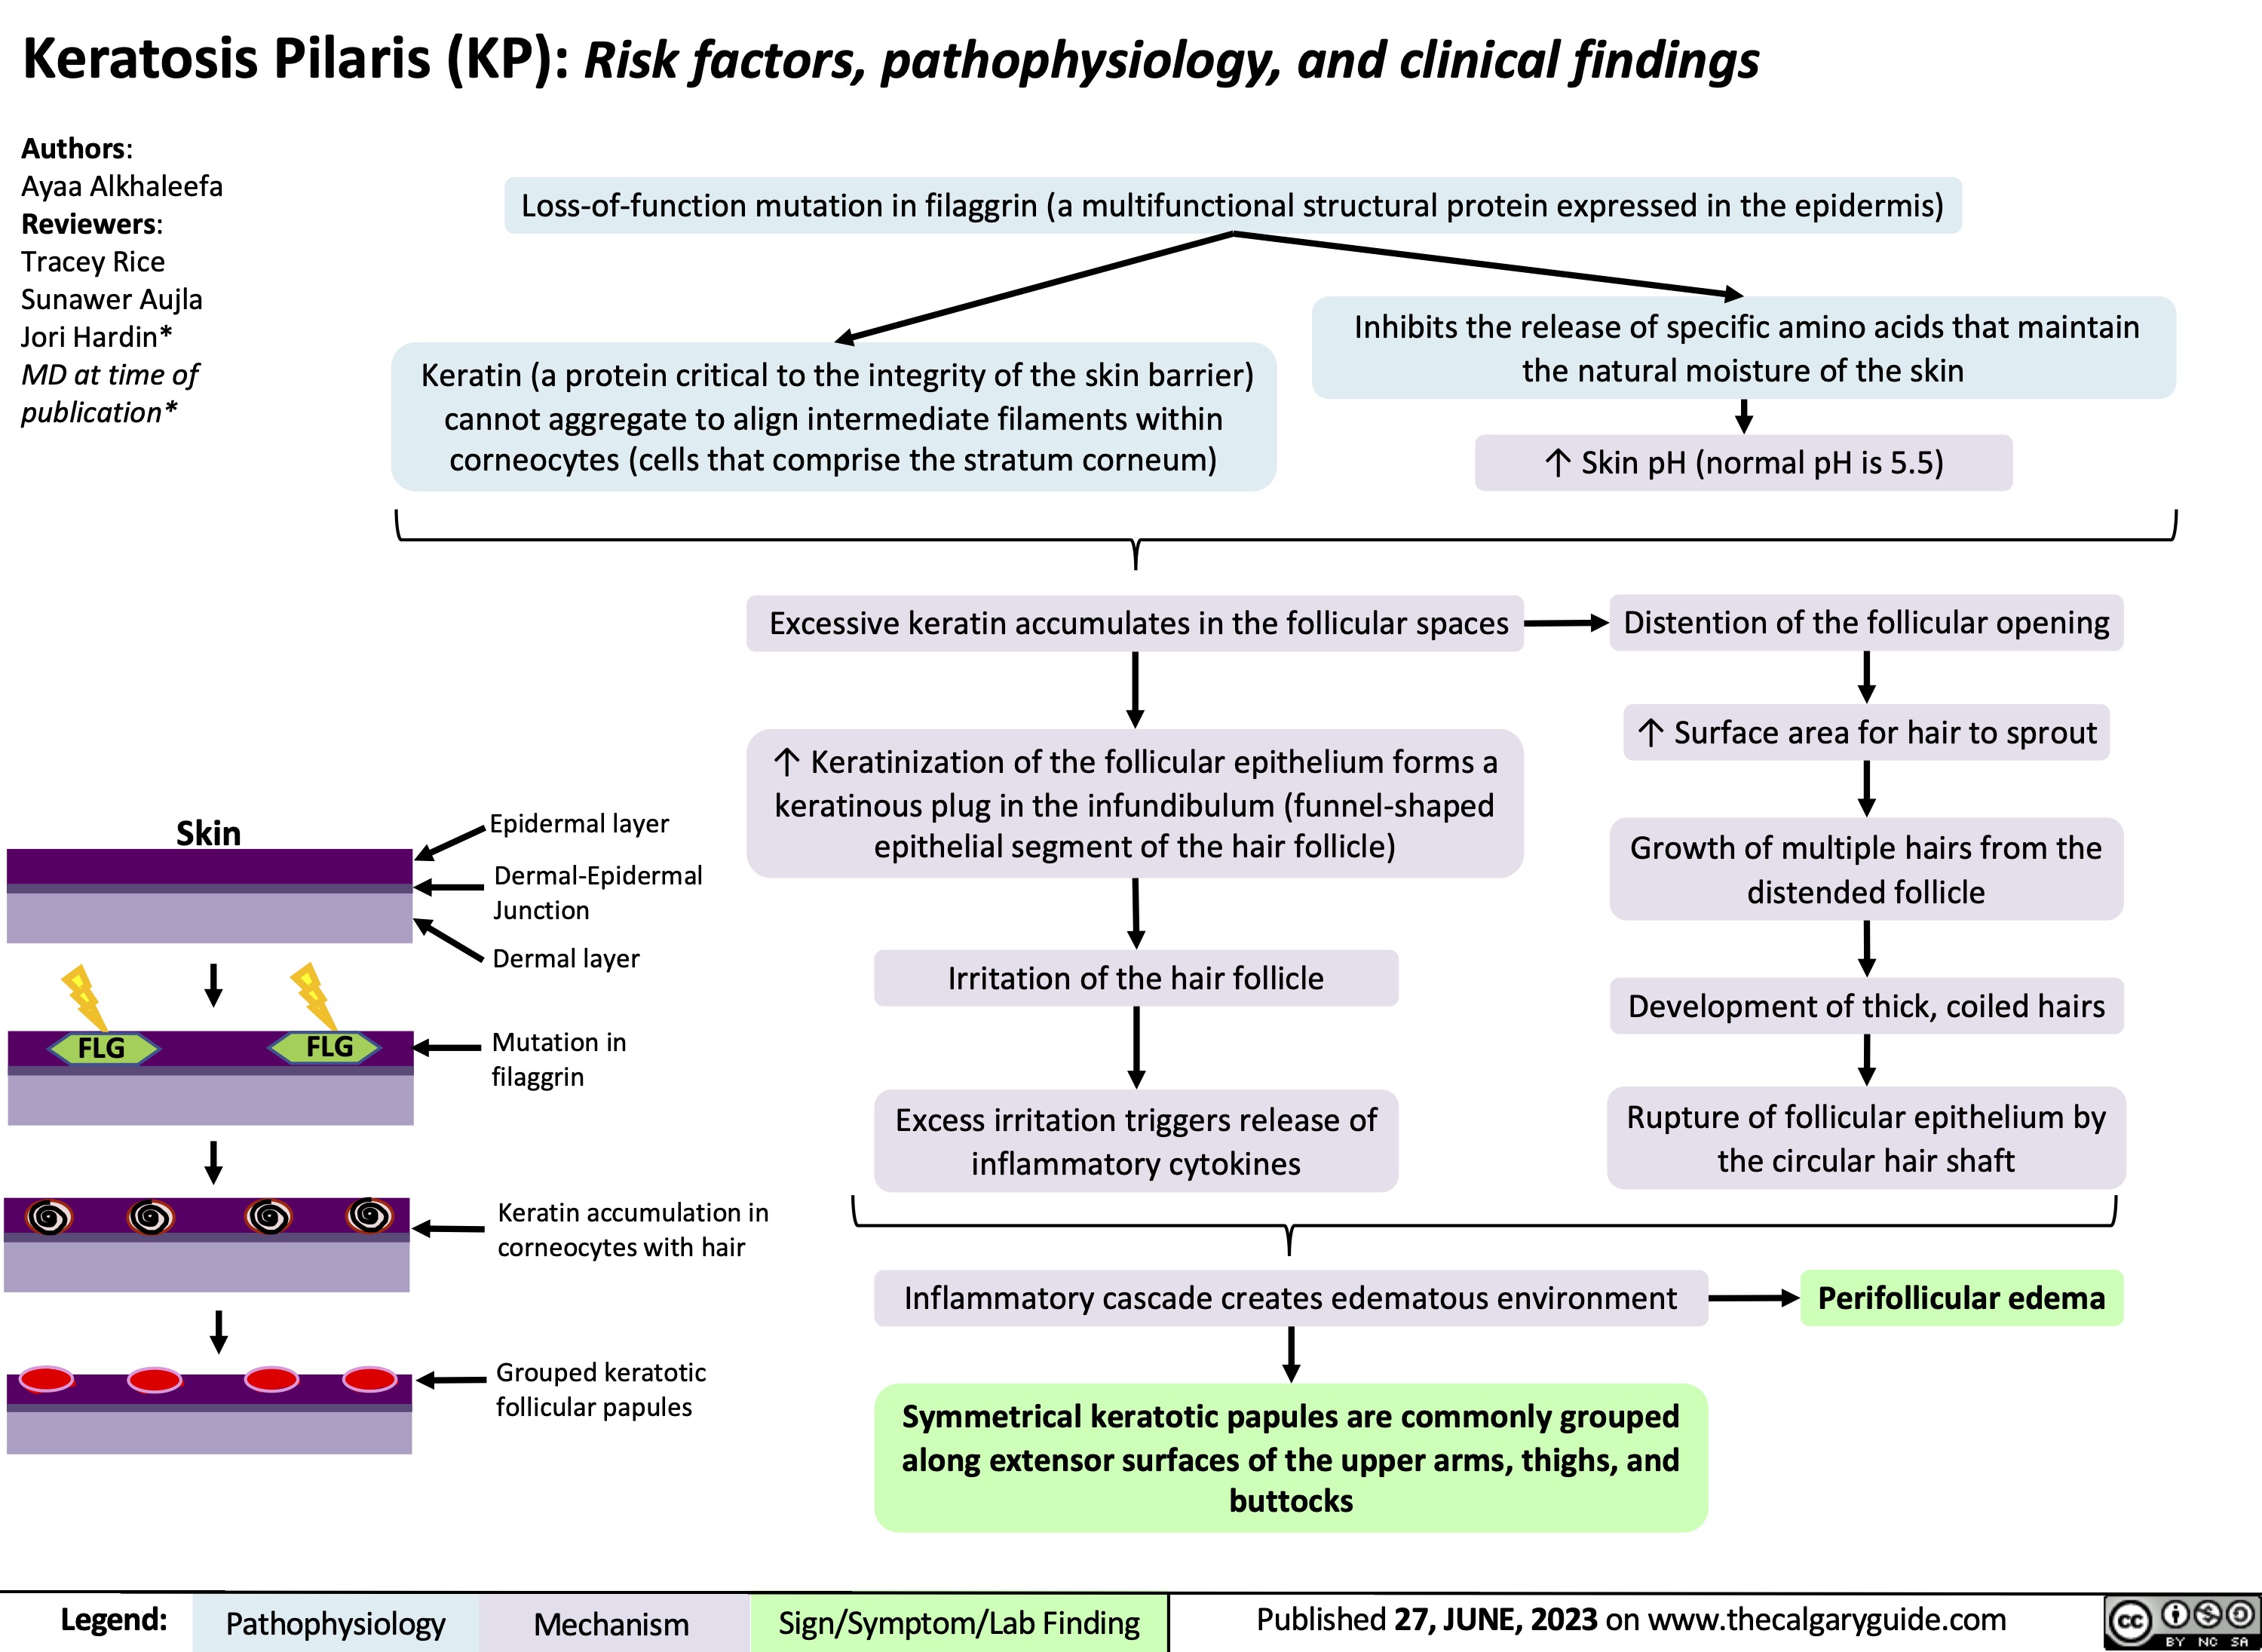 Keratosis Pilaris (KP): Risk factors, pathophysiology, and clinical findings
Authors:
Ayaa Alkhaleefa Reviewers: Tracey Rice Sunawer Aujla Jori Hardin* MD at time of publication*
Loss-of-function mutation in filaggrin (a multifunctional structural protein expressed in the epidermis)
Inhibits the release of specific amino acids that maintain
    Keratin (a protein critical to the integrity of the skin barrier) cannot aggregate to align intermediate filaments within corneocytes (cells that comprise the stratum corneum)
the natural moisture of the skin ↑ Skin pH (normal pH is 5.5)
Distention of the follicular opening
↑ Surface area for hair to sprout
Growth of multiple hairs from the distended follicle
Development of thick, coiled hairs
Rupture of follicular epithelium by the circular hair shaft
    Skin
Epidermal layer
Dermal-Epidermal Junction
Dermal layer
Mutation in filaggrin
Keratin accumulation in corneocytes with hair
Grouped keratotic follicular papules
Excessive keratin accumulates in the follicular spaces
↑ Keratinization of the follicular epithelium forms a keratinous plug in the infundibulum (funnel-shaped epithelial segment of the hair follicle)
Irritation of the hair follicle
Excess irritation triggers release of inflammatory cytokines
         FLG FLG
           Inflammatory cascade creates edematous environment
Symmetrical keratotic papules are commonly grouped along extensor surfaces of the upper arms, thighs, and buttocks
Perifollicular edema
     Legend:
 Pathophysiology
Mechanism
 Sign/Symptom/Lab Finding
 Published 27, JUNE, 2023 on www.thecalgaryguide.com
  